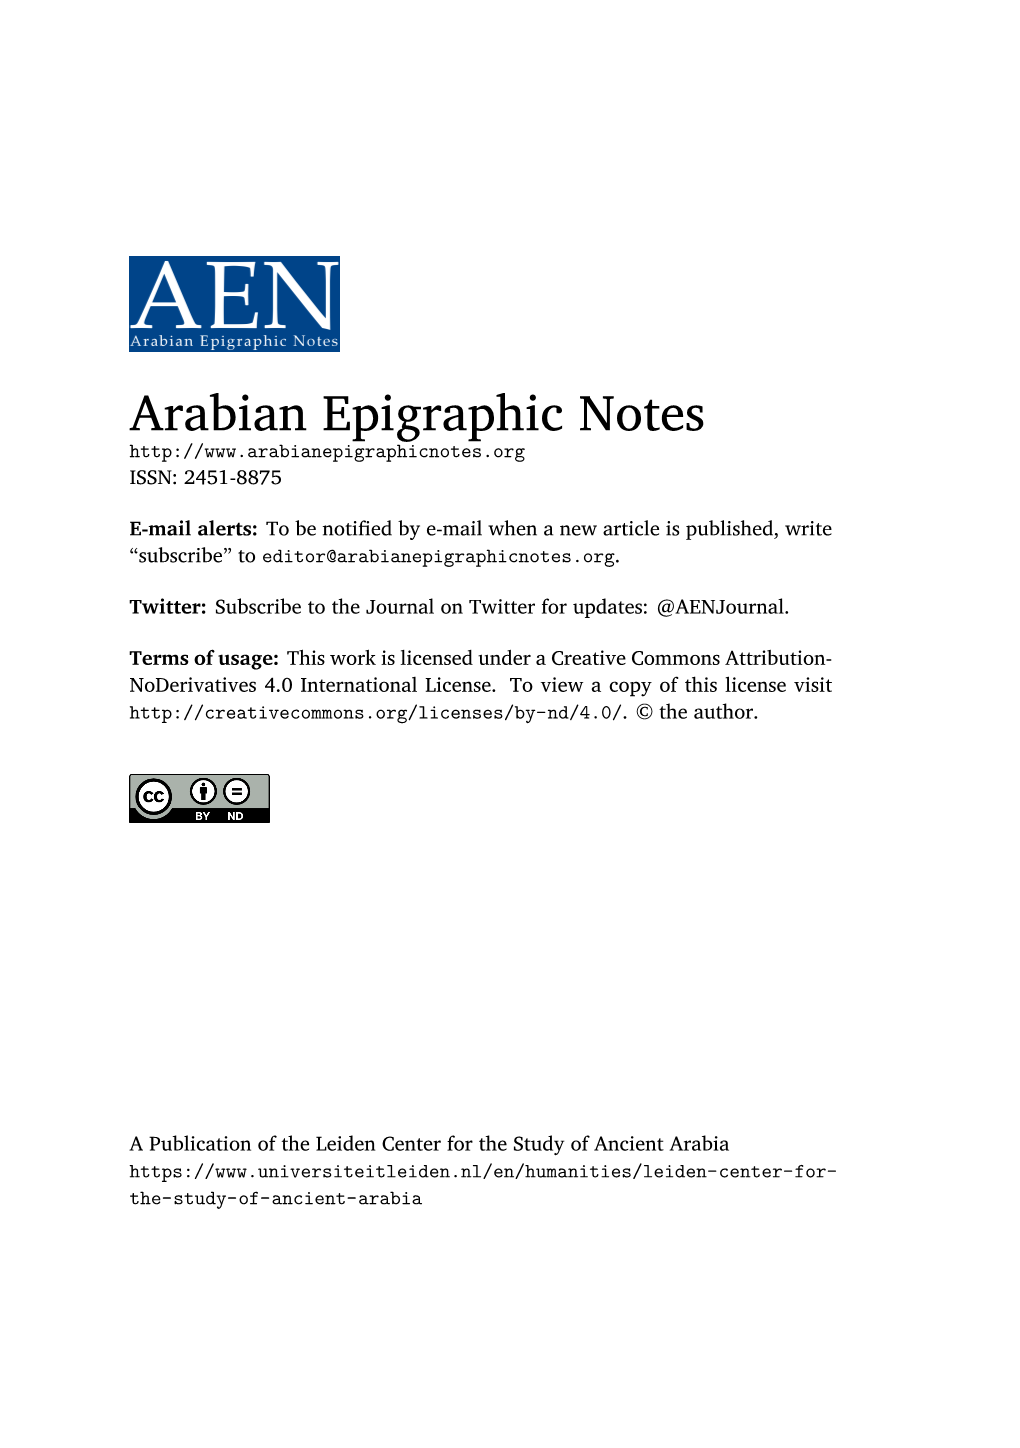 Arabian Epigraphic Notes ISSN: 2451-8875